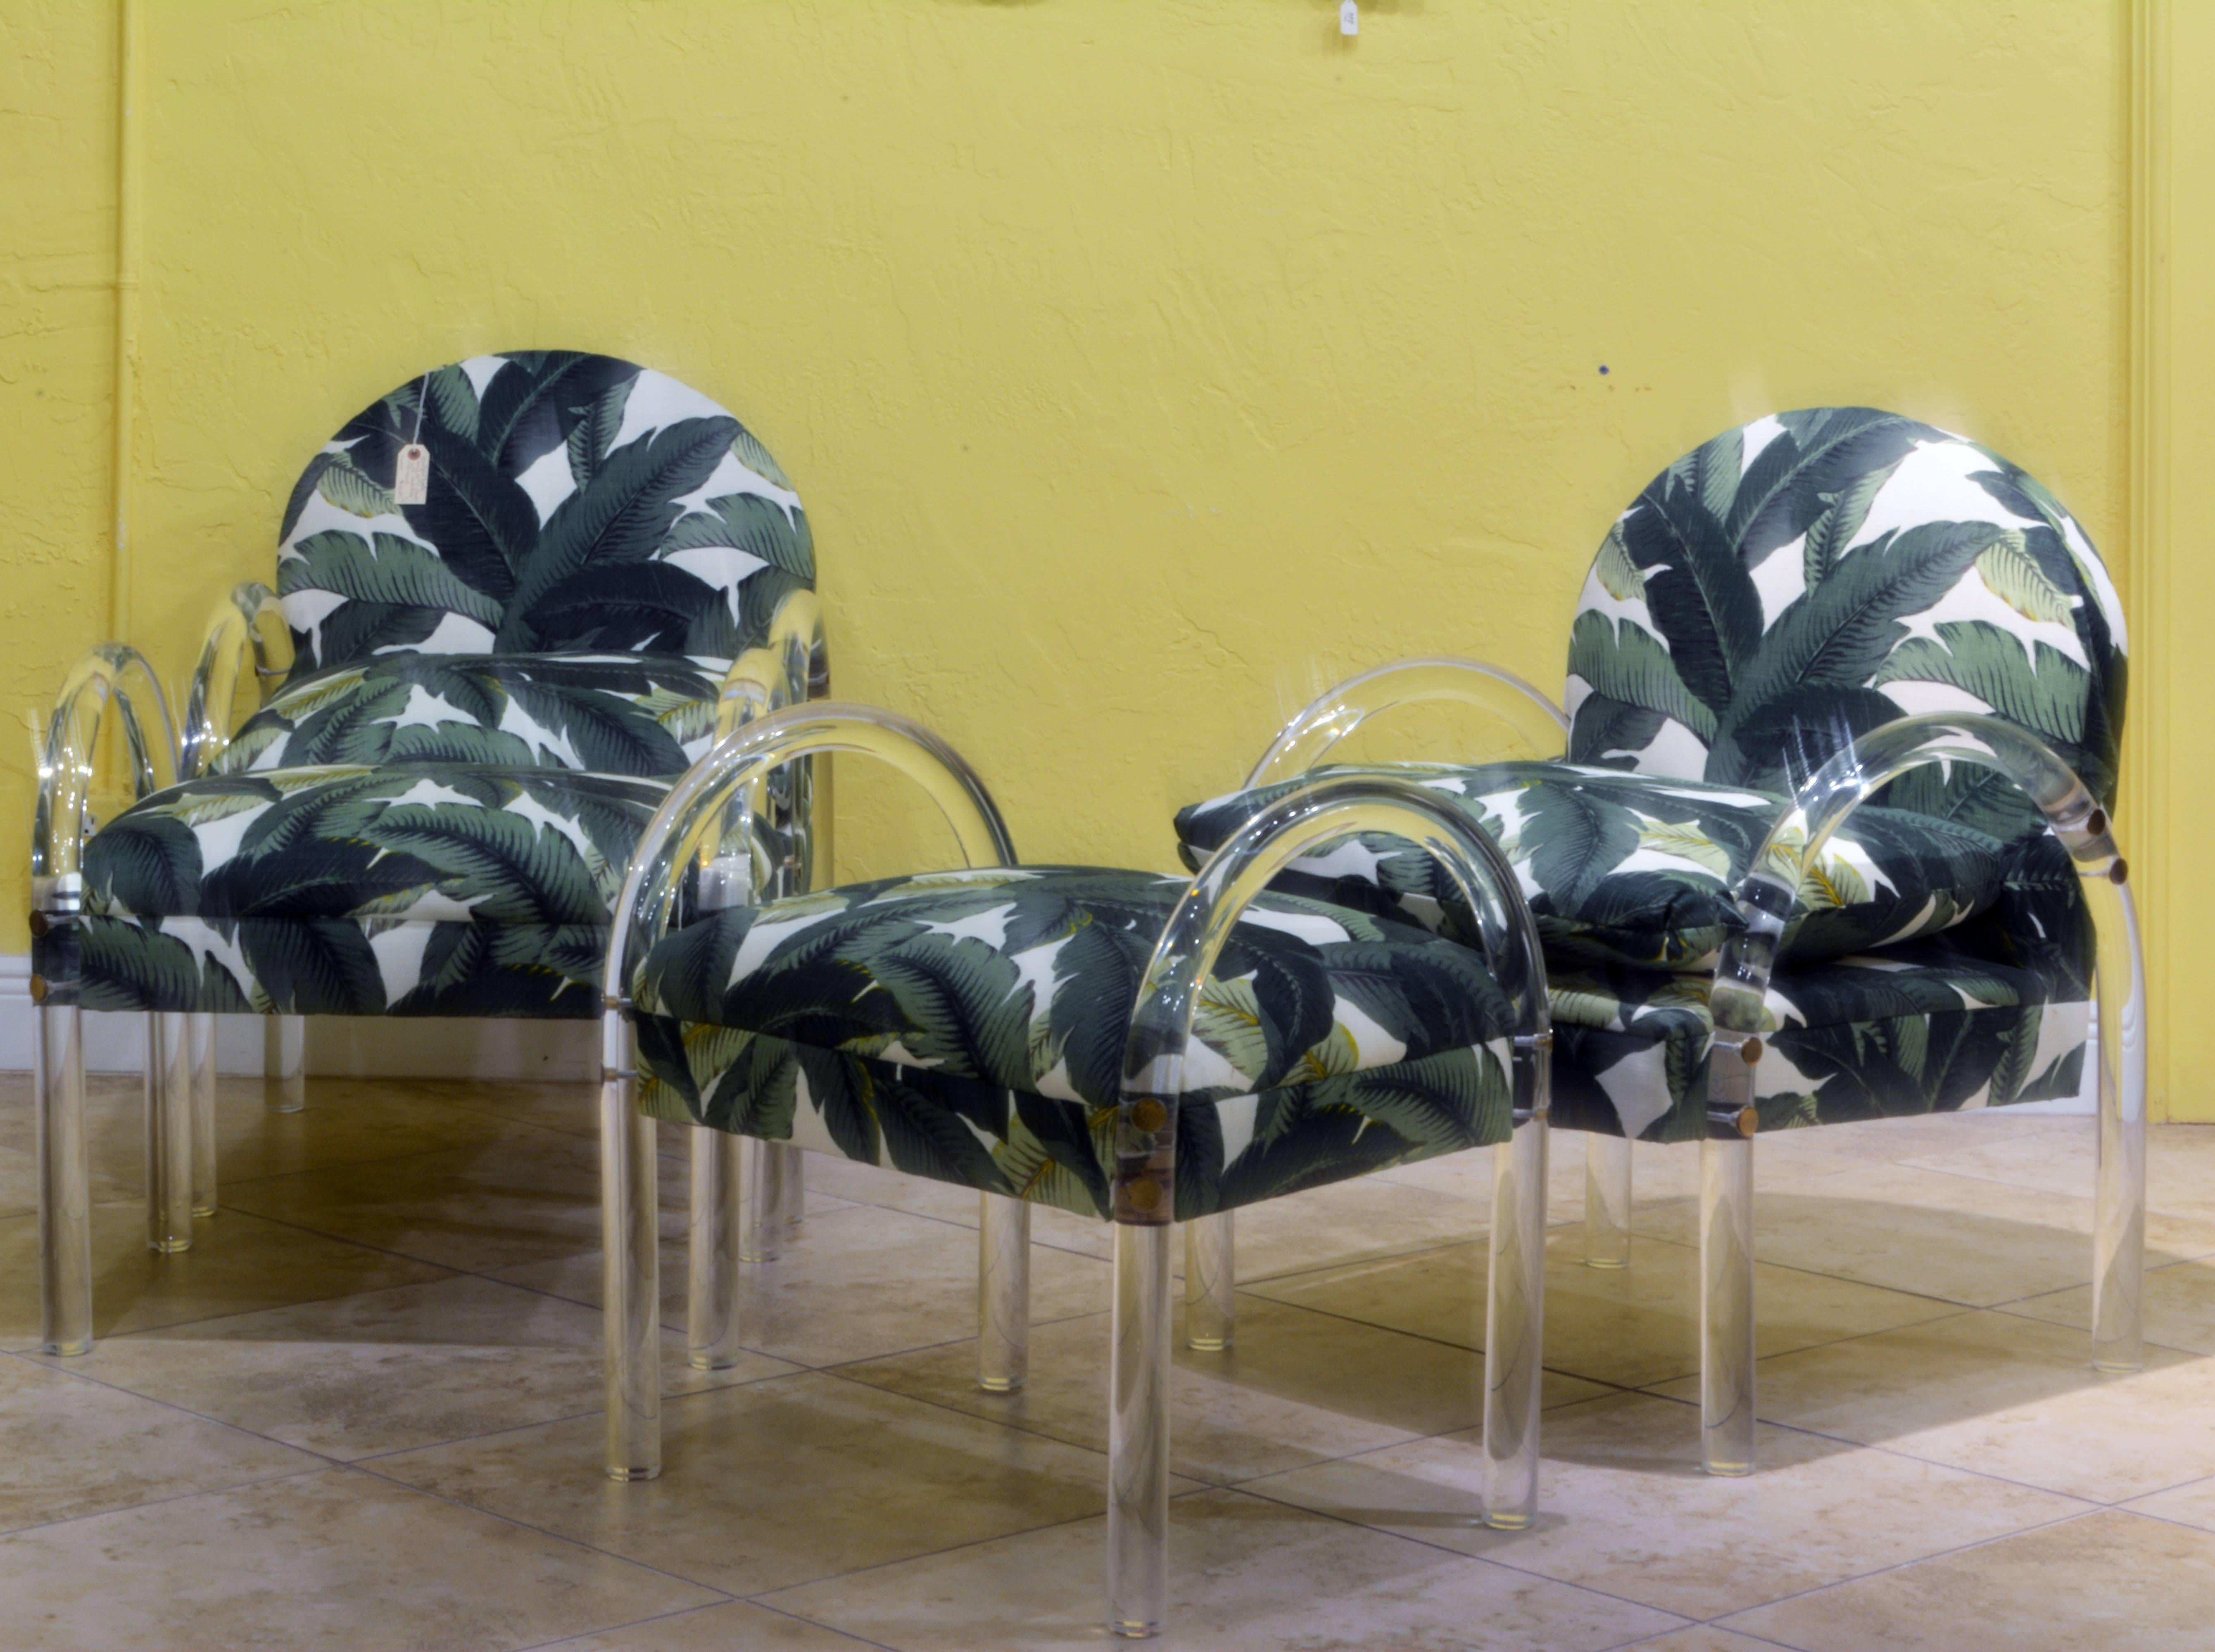 Newly covered with vibrant tropical fabric these vintage Mid-Century Modern style chairs belong to the classics of American design. The chairs measure W 25 in. D 28 in. H 35 in. Seat H 19.5 in. The ottomans measure W 25 in. D 19 in. H 26 in. Seat H